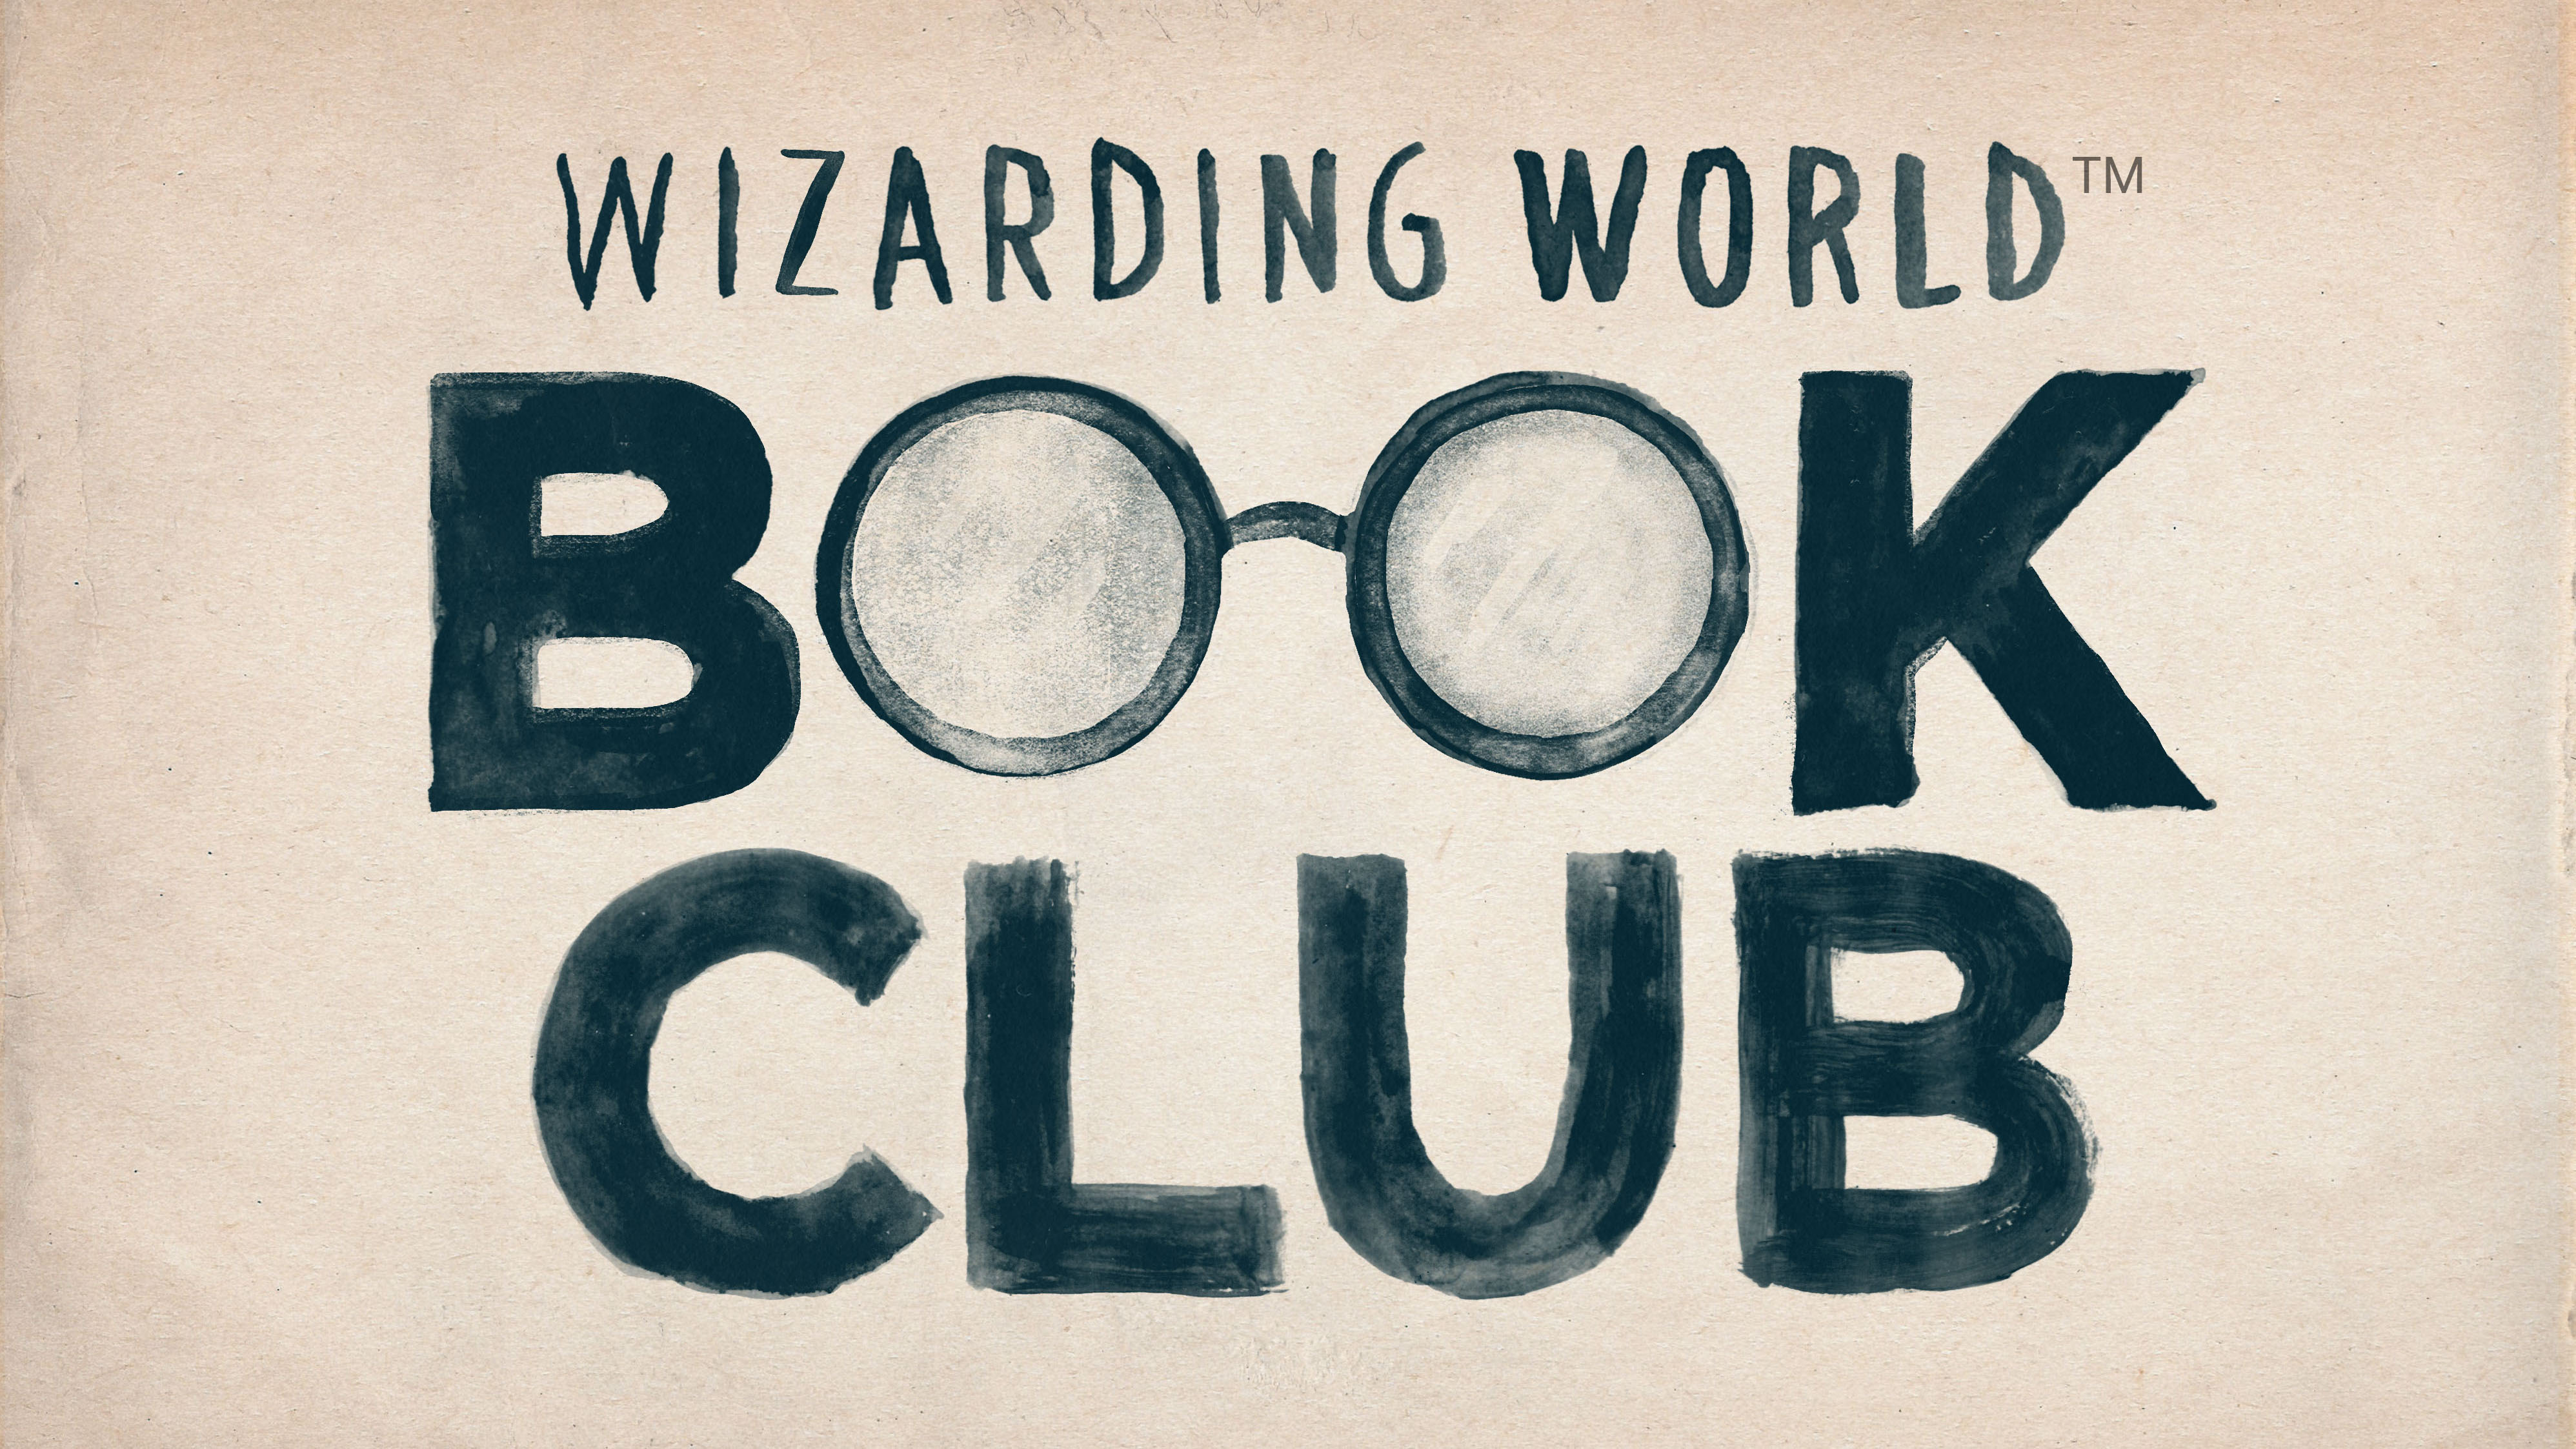 The world is book. Book Club. Bookstack logo.